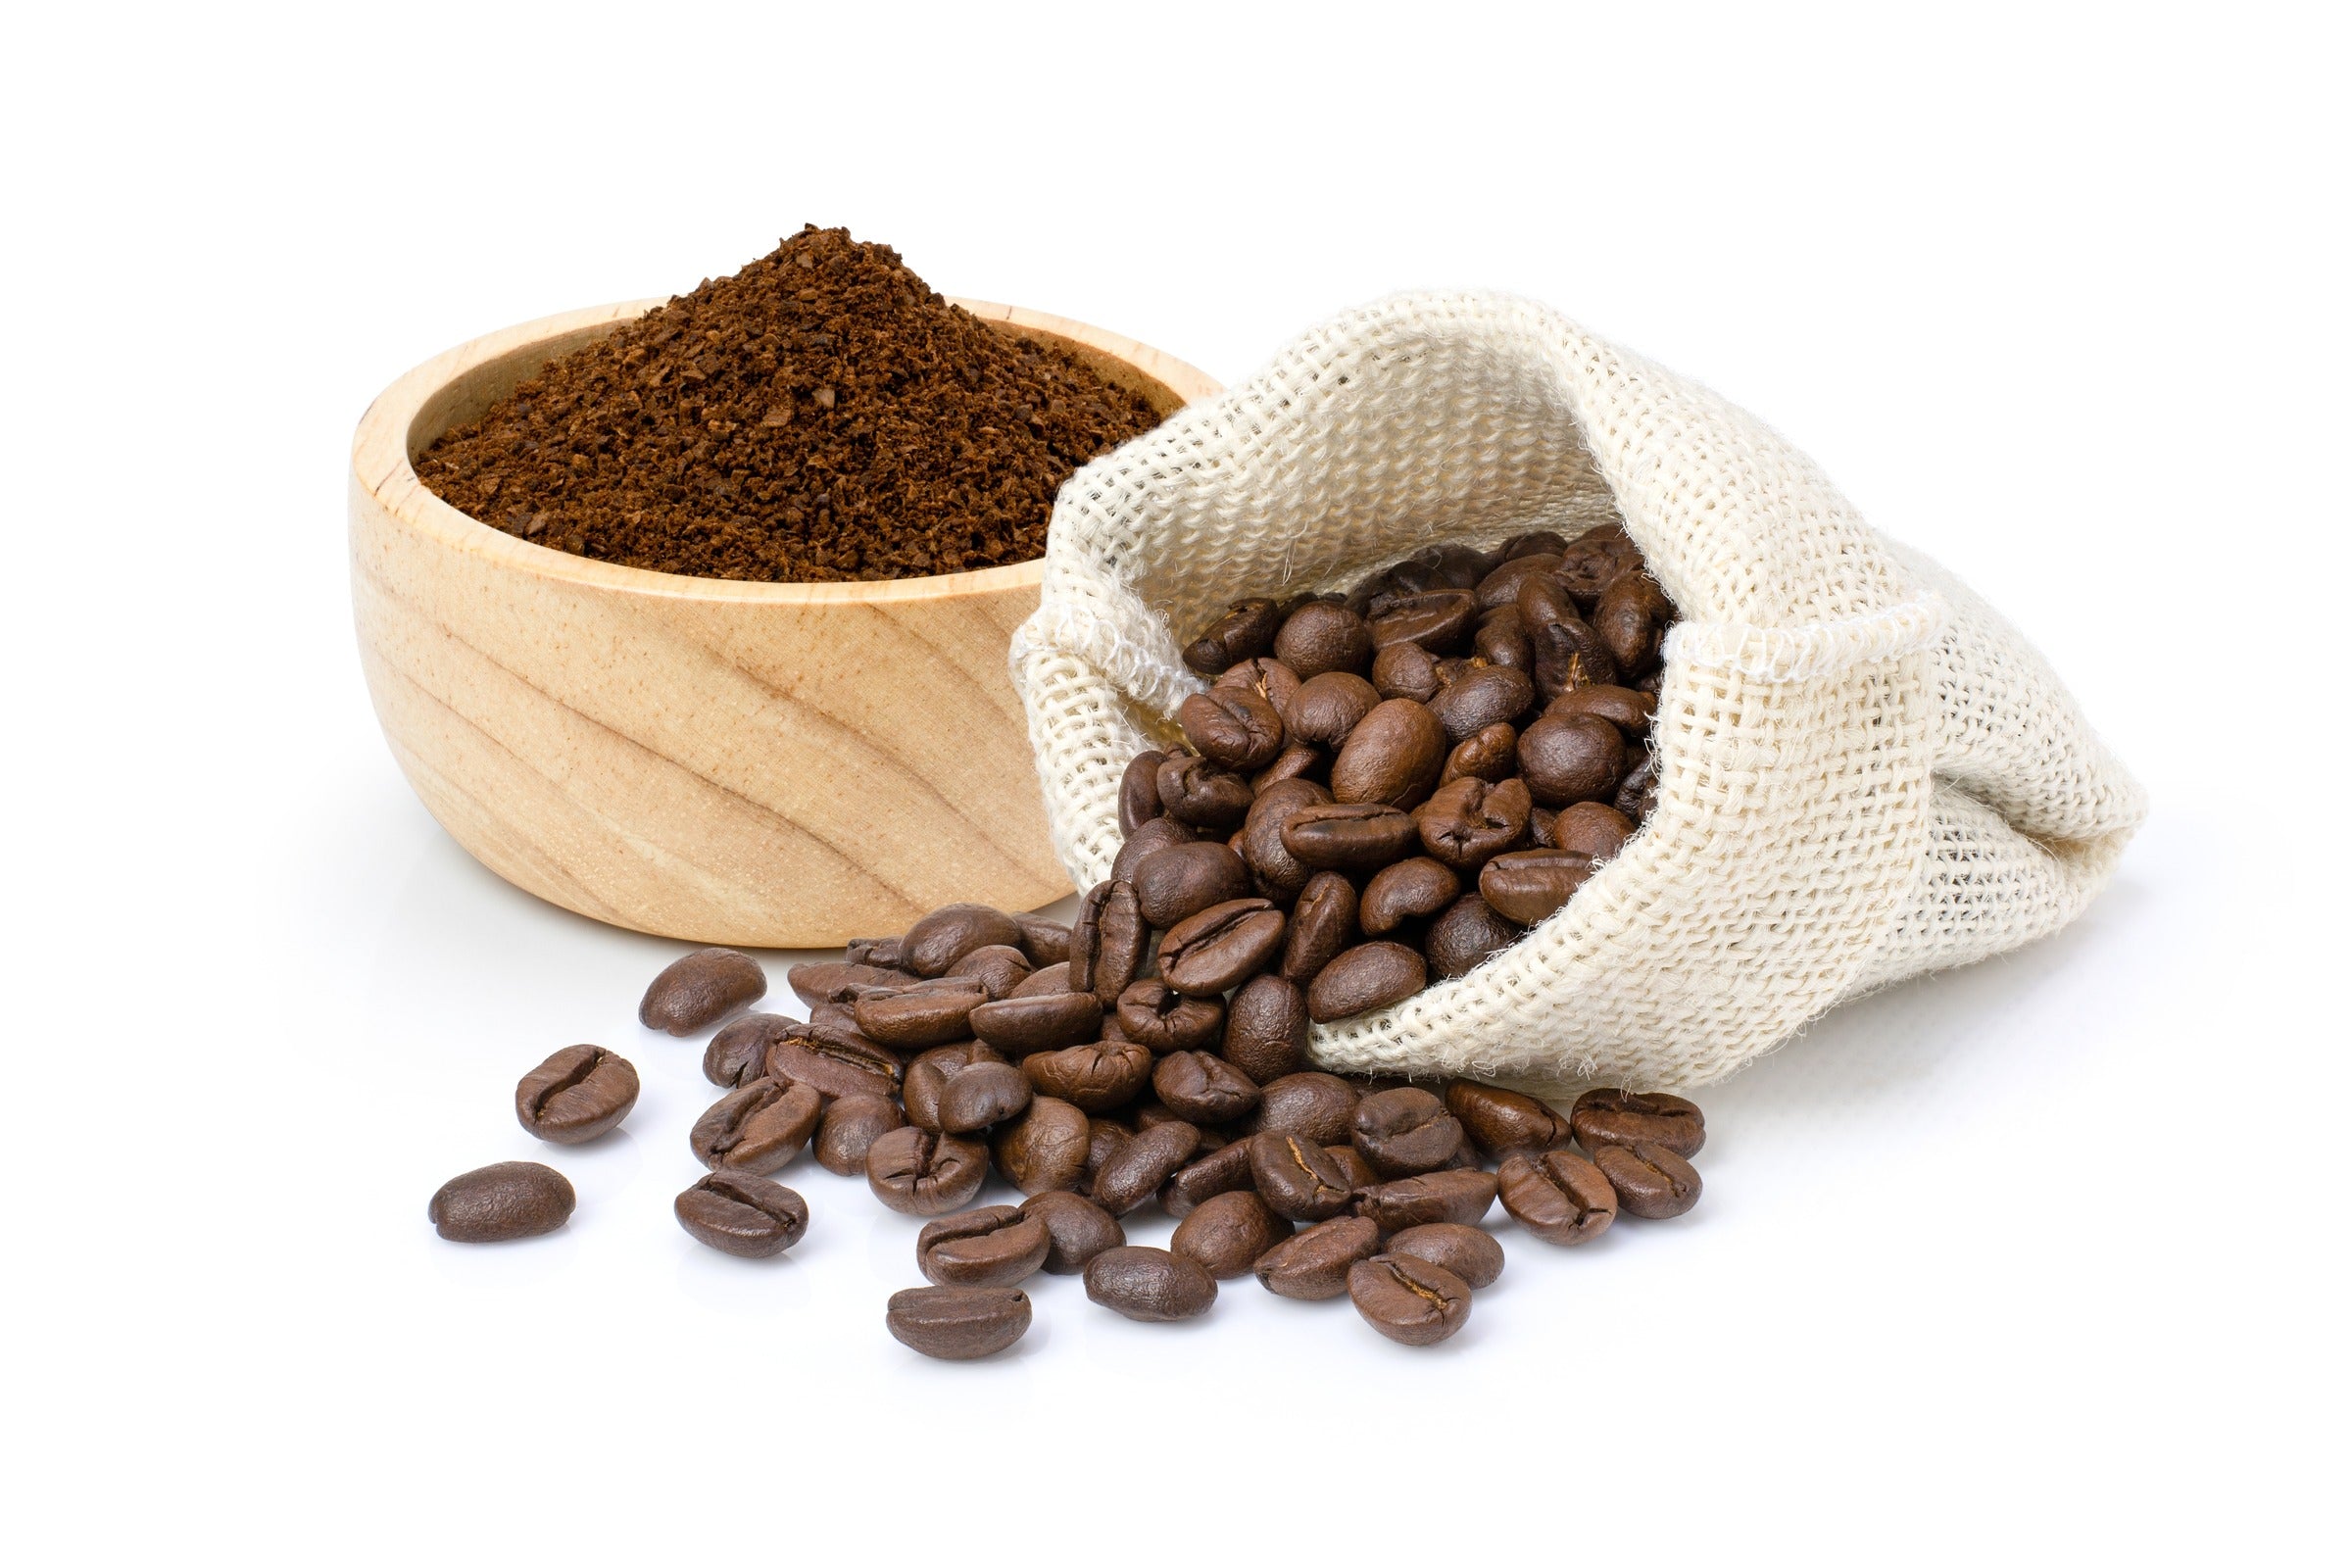 Reasons You Could Be Allergic To Coffee But Not Caffeine